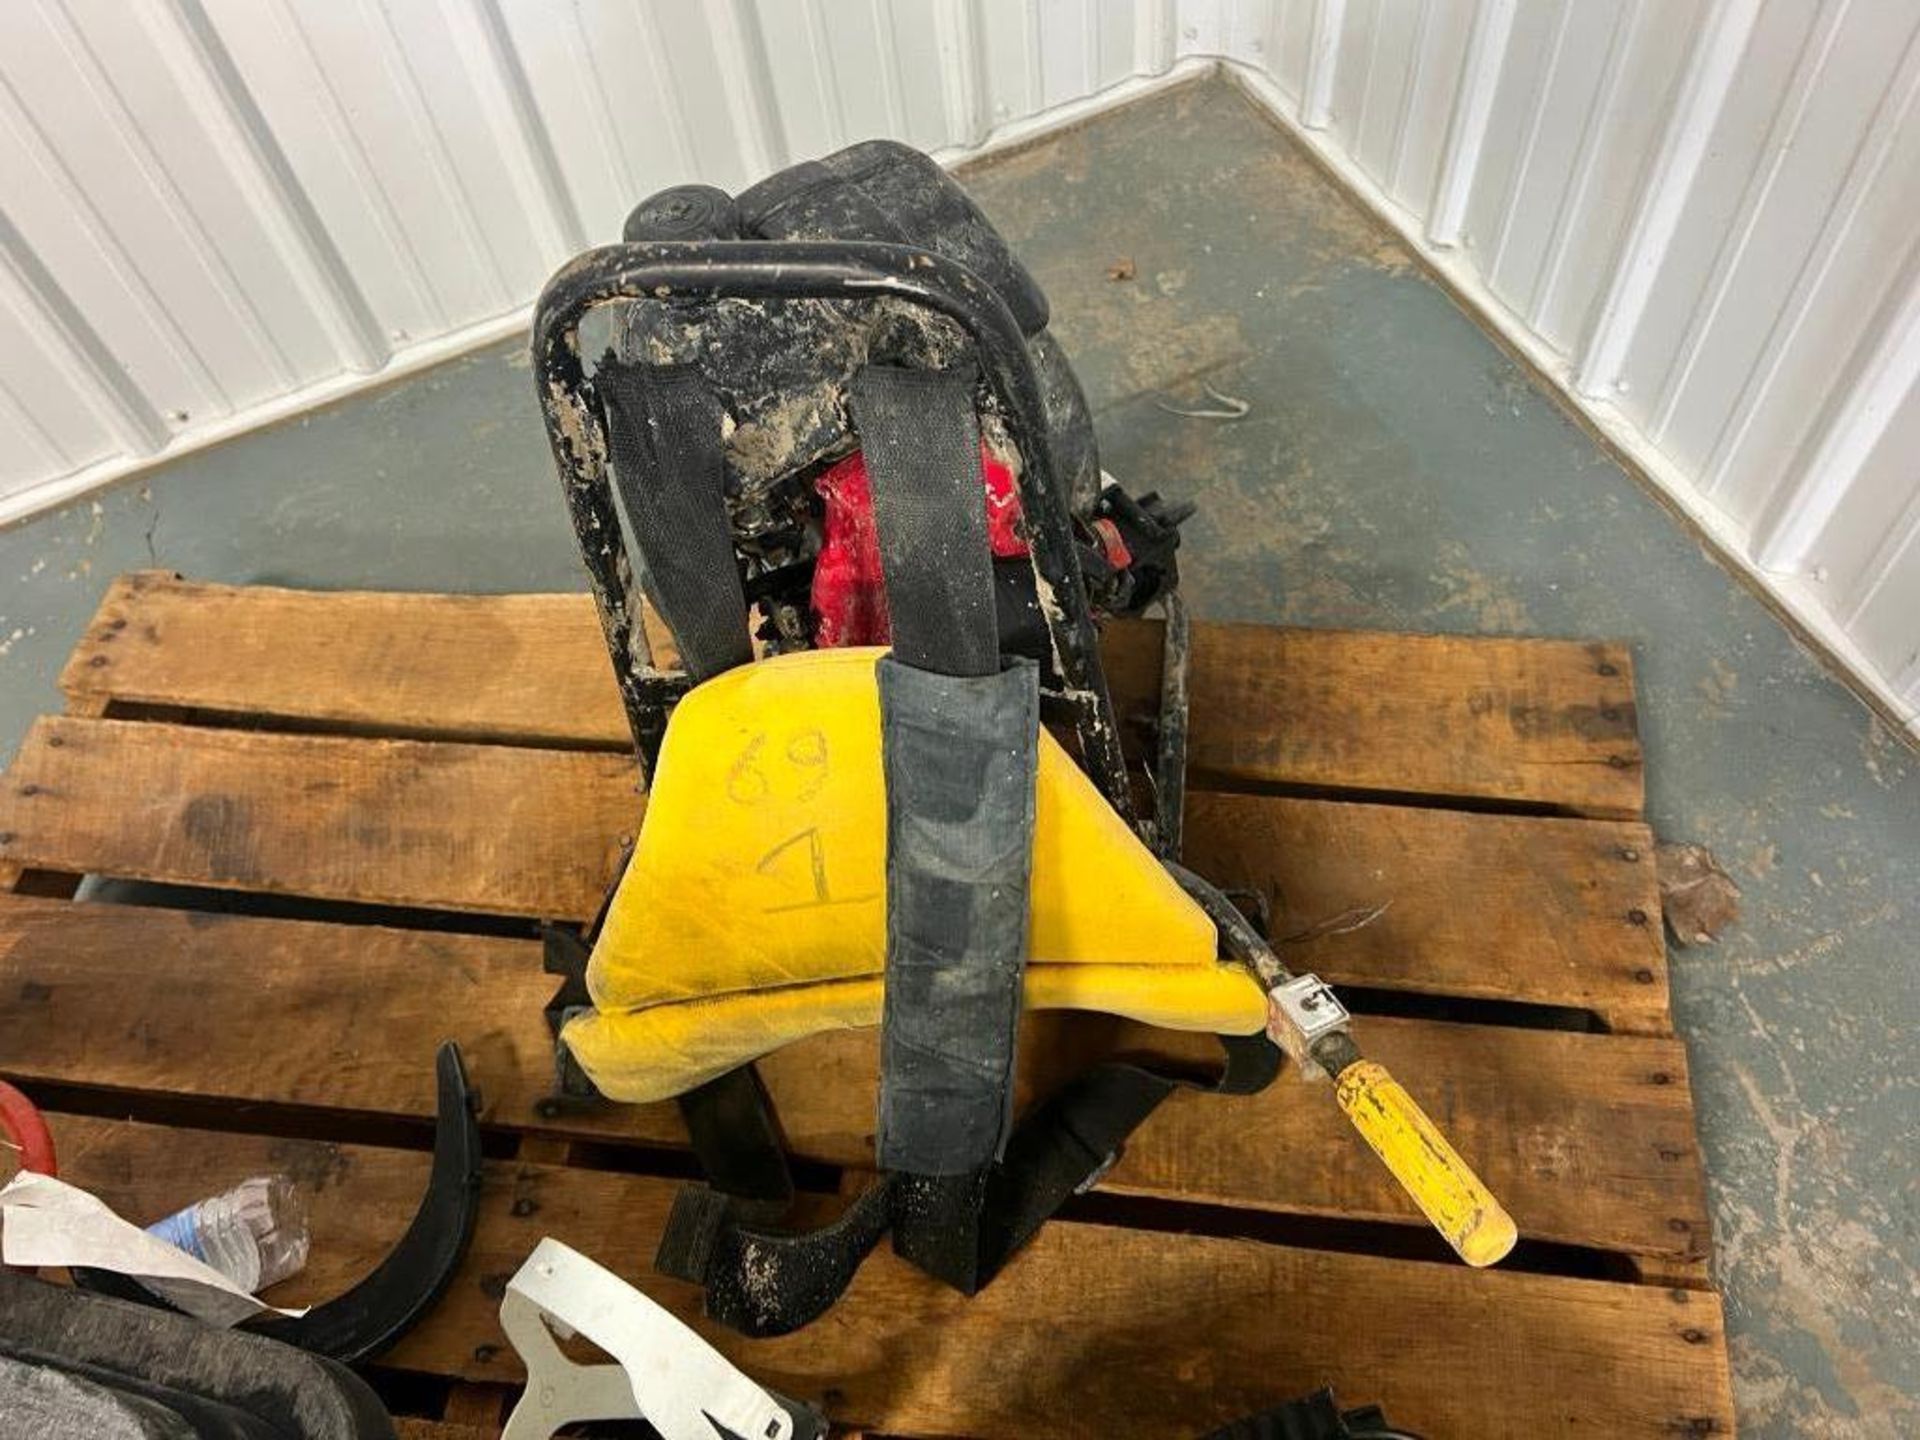 Oztec Model BP-50a Gas Backpack Concrete Vibrator. Located in Mt. Pleasant, IA